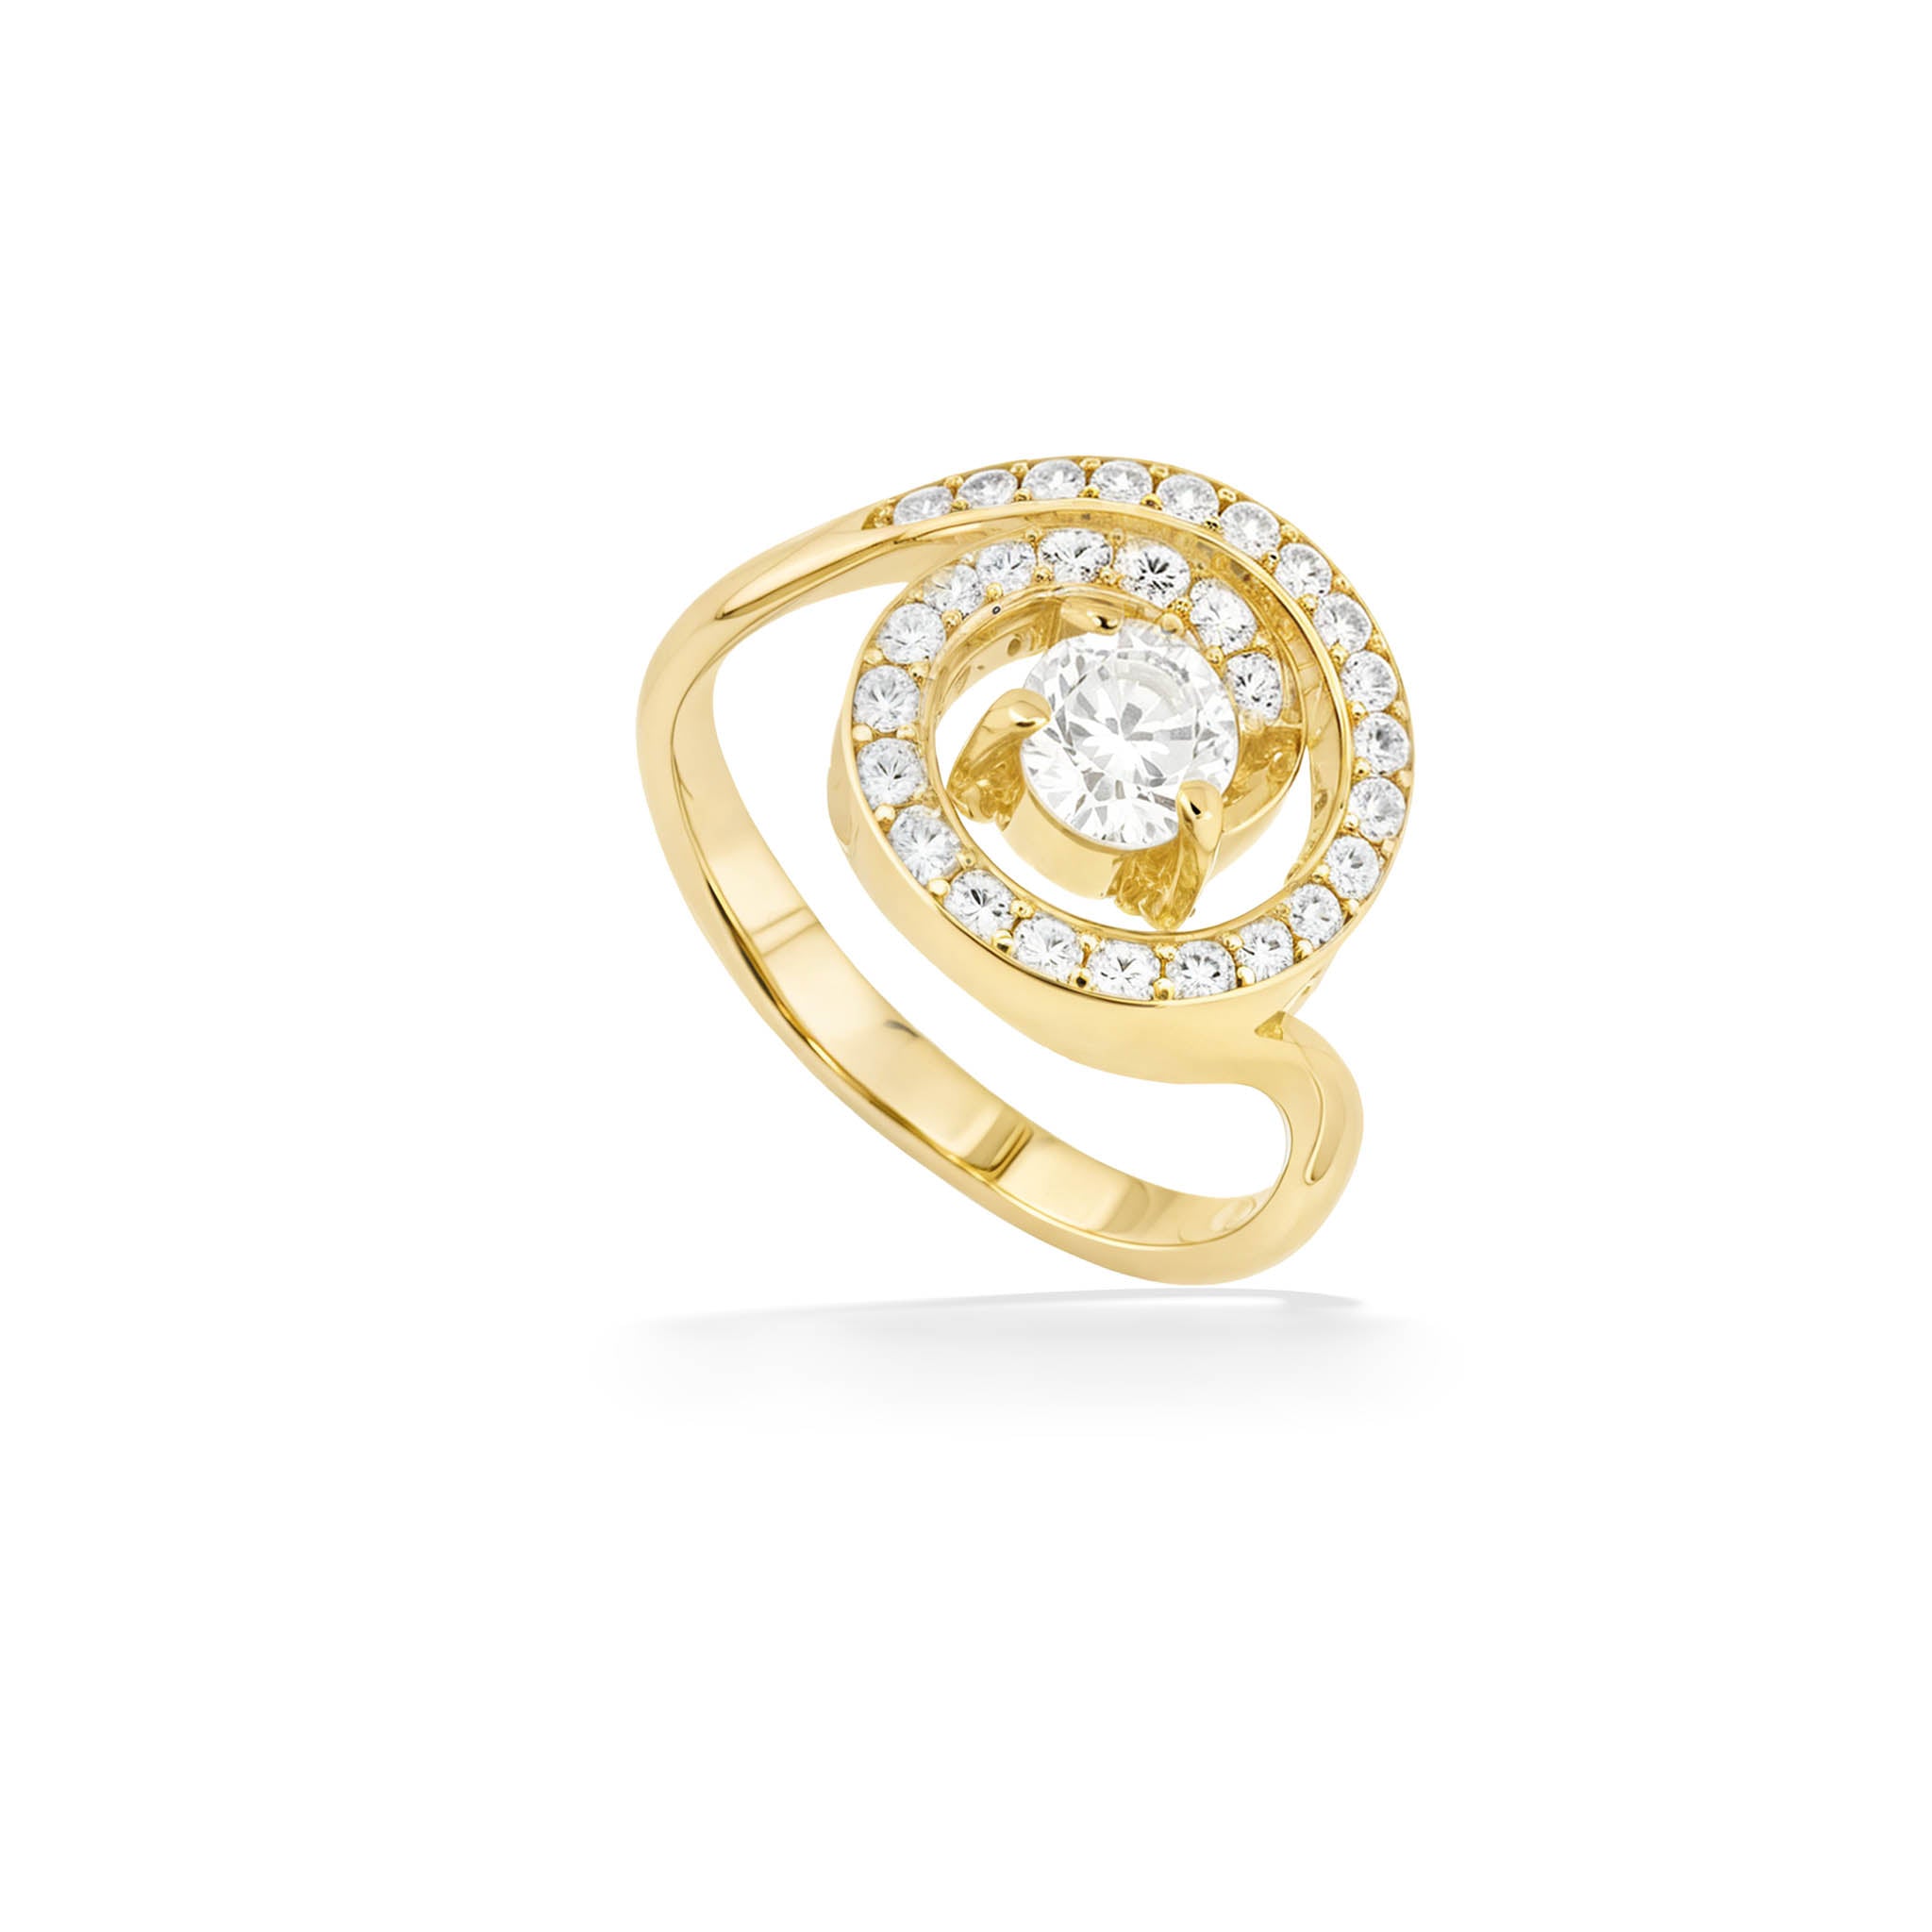 Ethereal 18 Karat Yellow Gold And Diamond Square Finger Ring